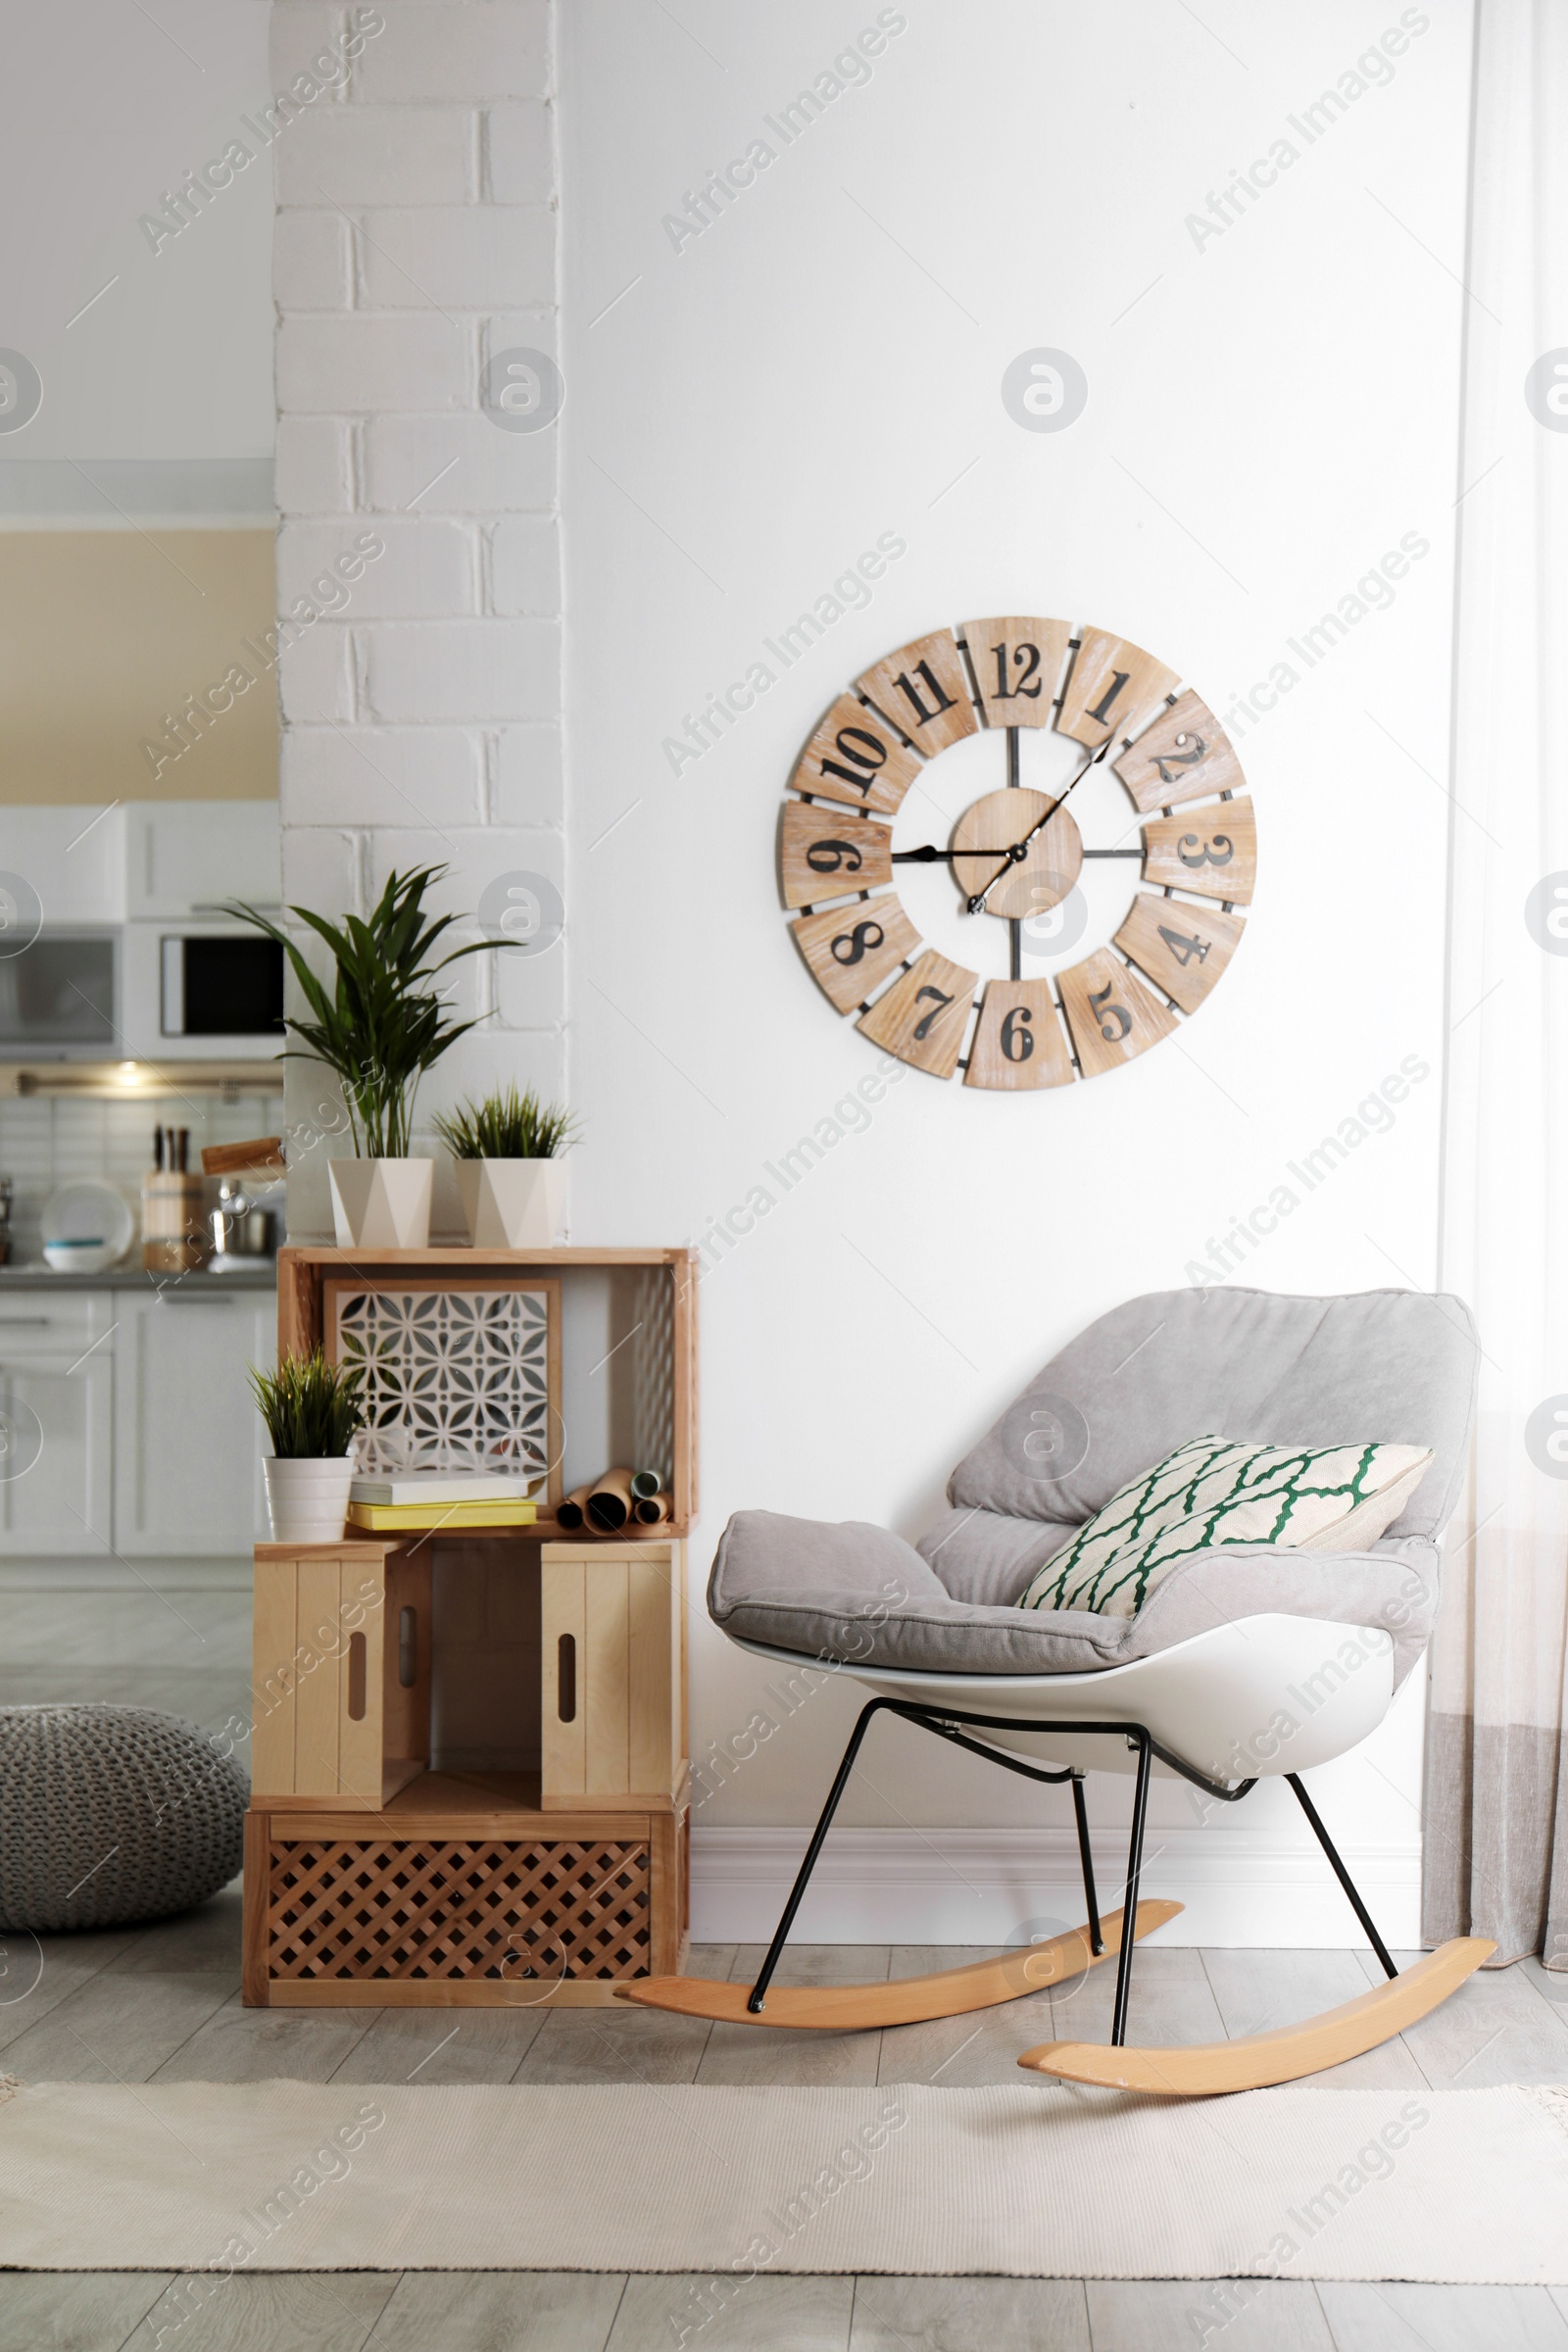 Photo of Rocking chair and wooden crates in room interior. Eco style